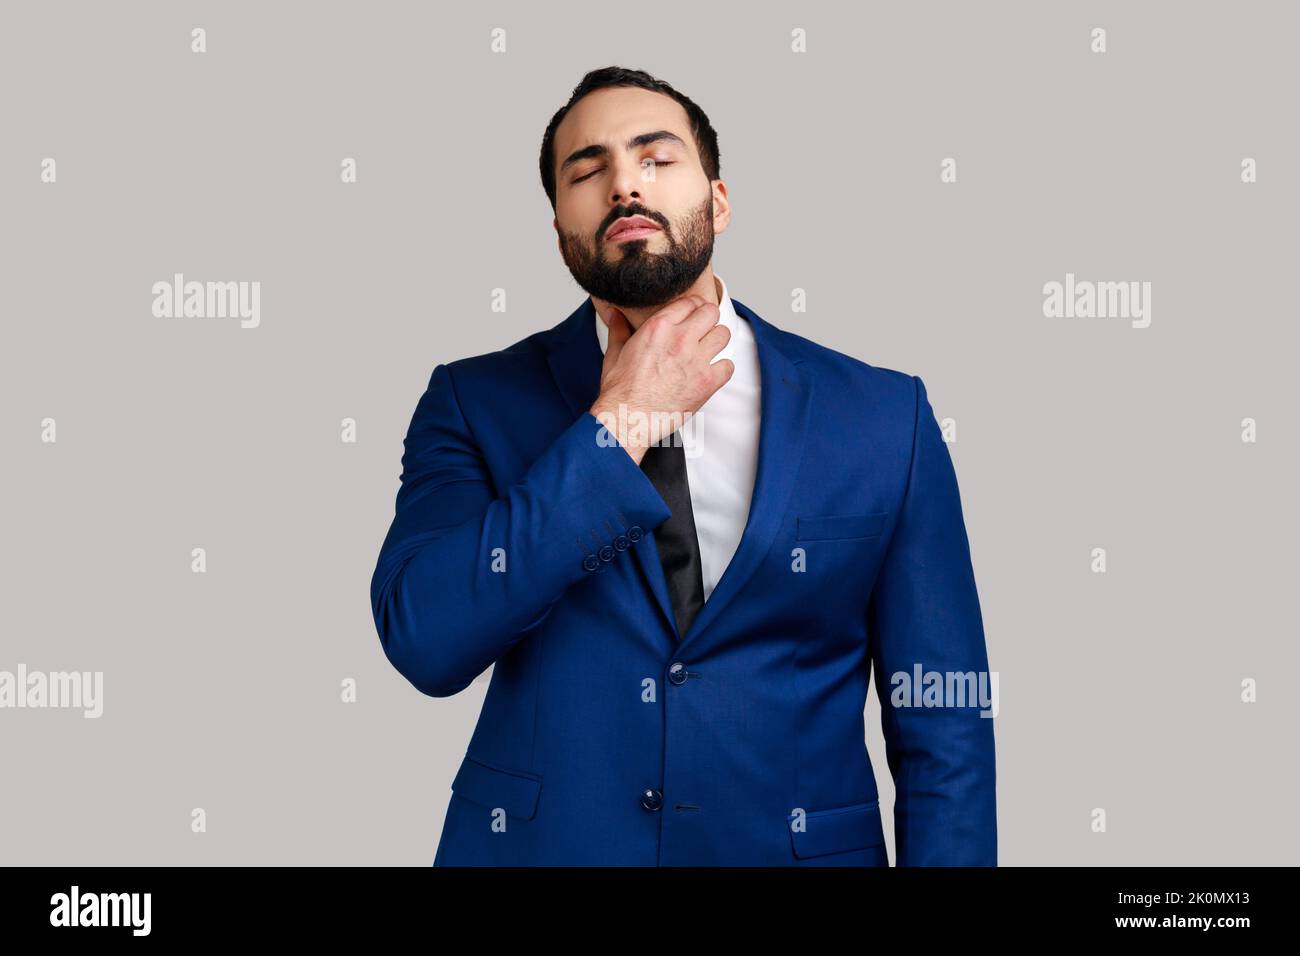 Unhealthy bearded man touching neck feeling pain while swallowing, result of chocking, throat inflammation, sore throat, wearing official style suit. Indoor studio shot isolated on gray background. Stock Photo